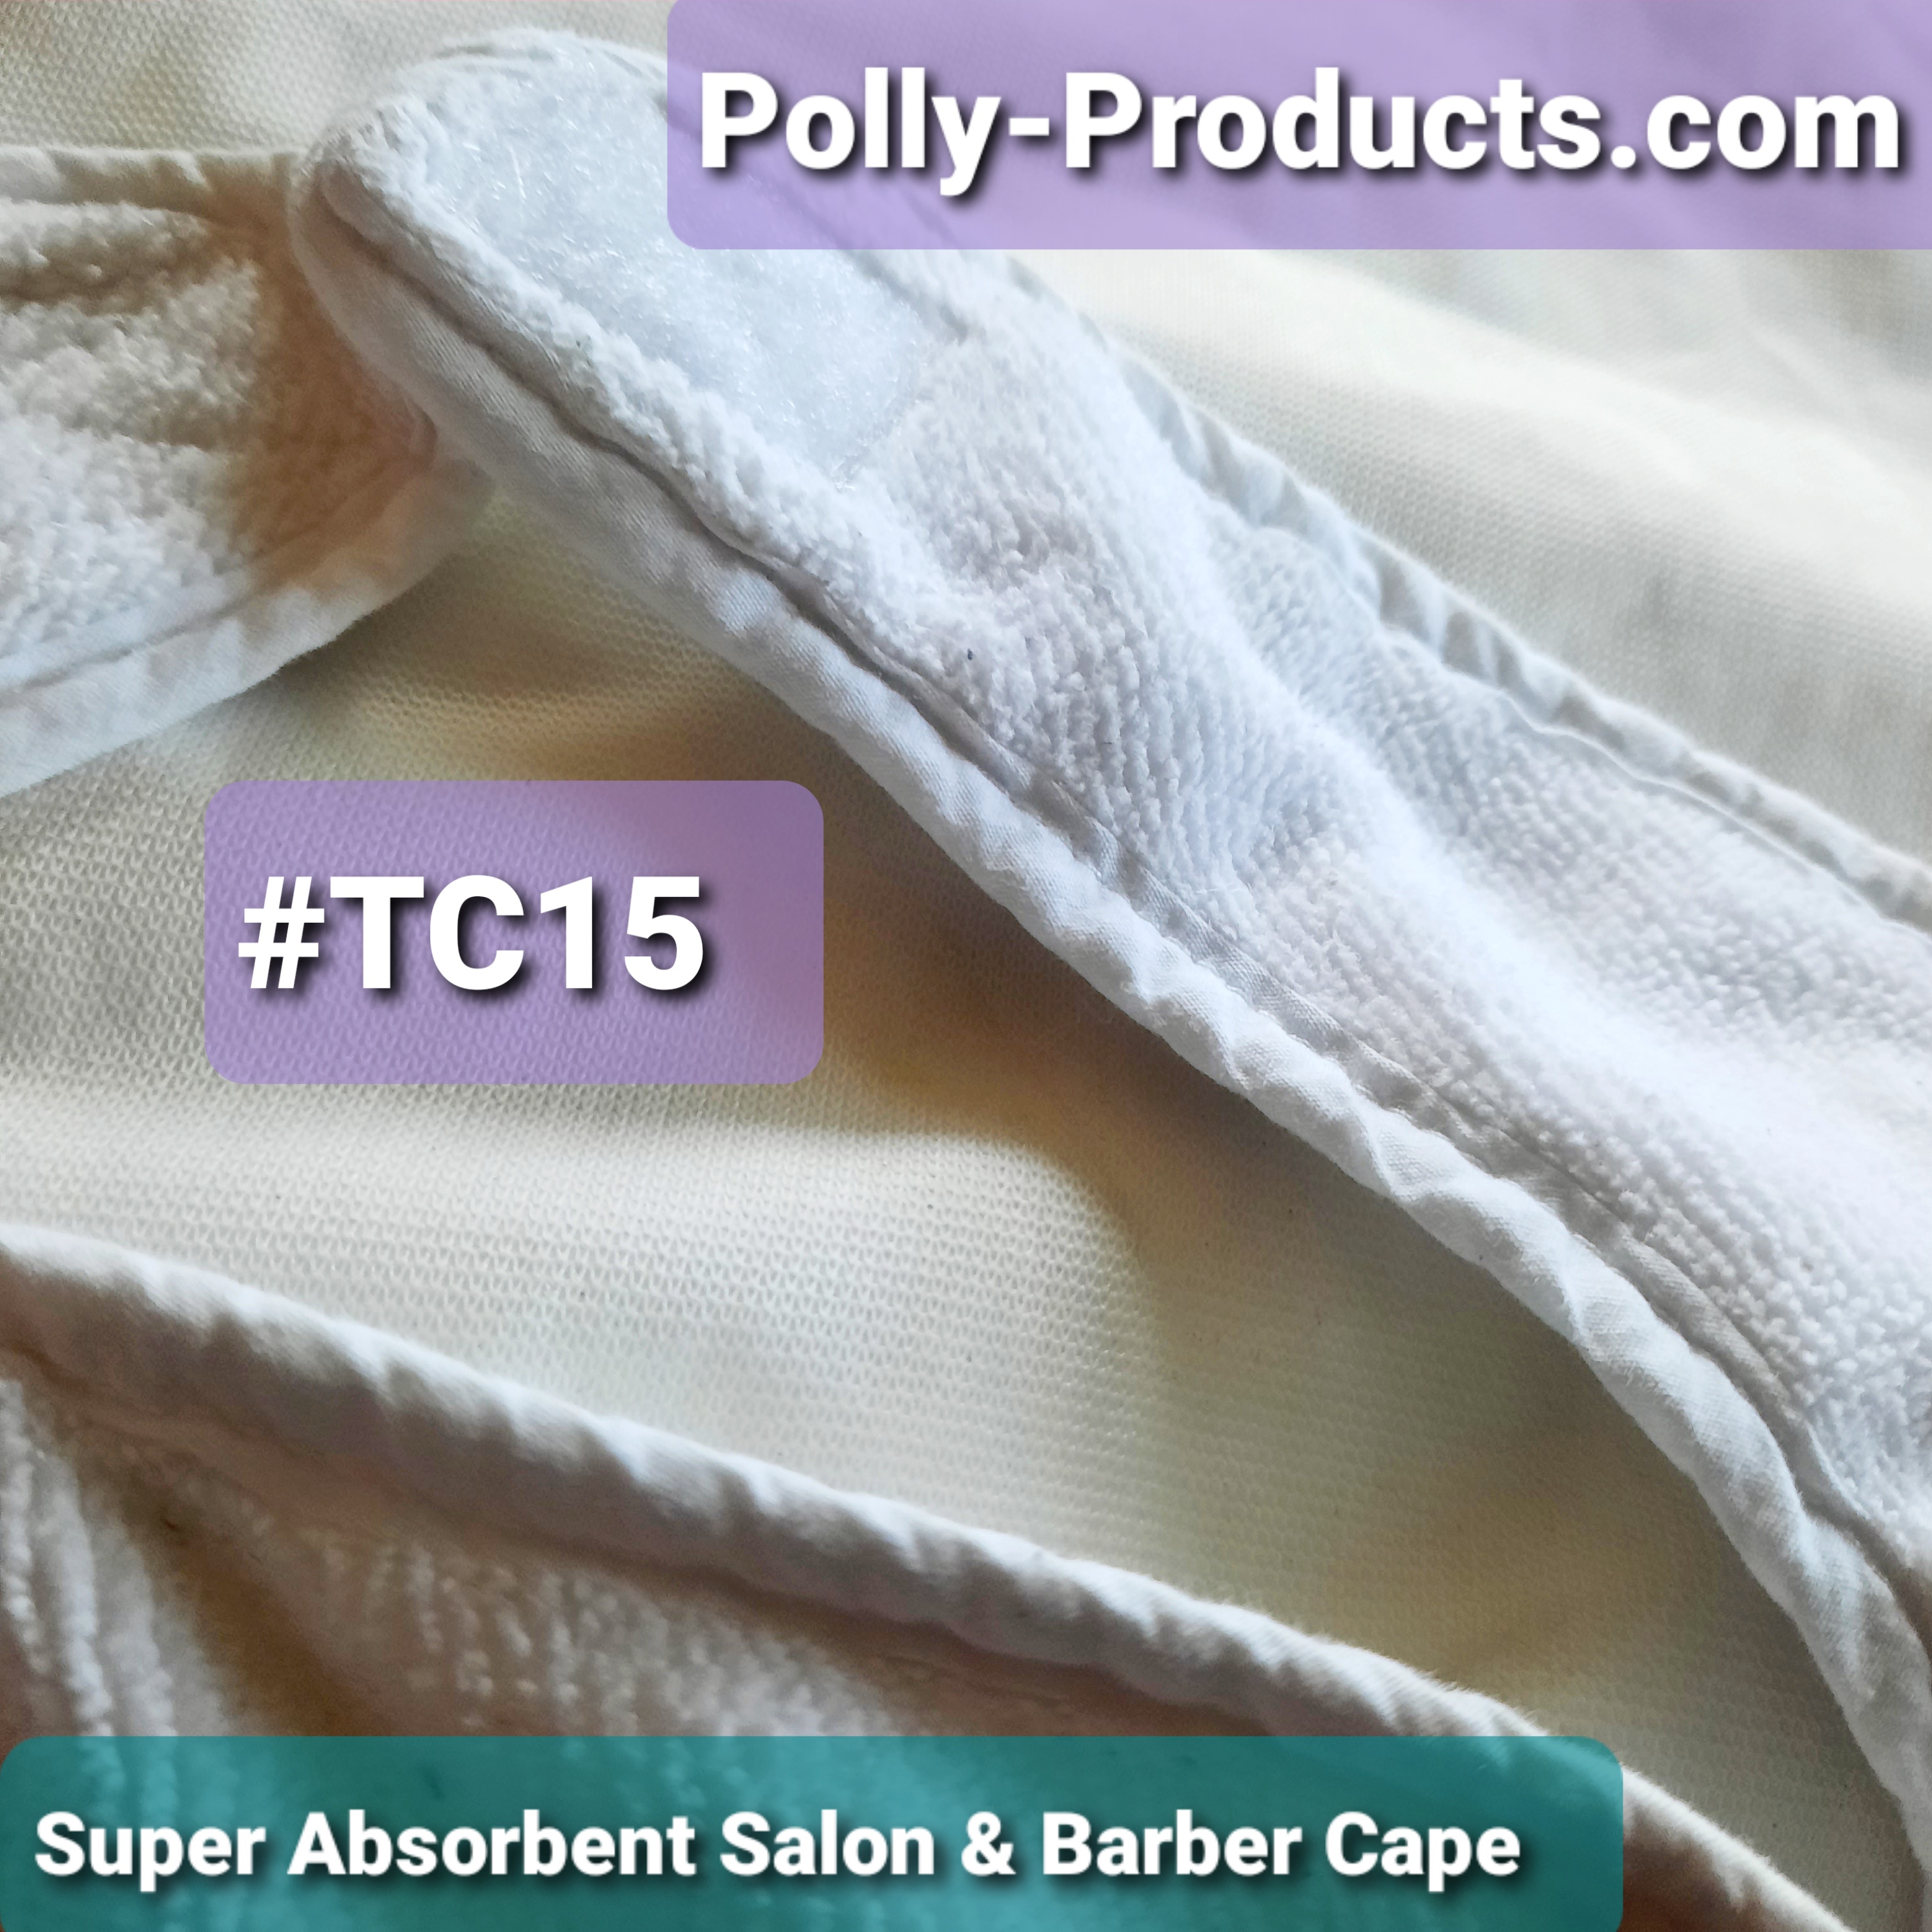 #TC15 POLLY PRODUCTS BRILLIANTE tm BEAUTY AND BARBER PRO tm MEDIUM CAPE WITH UNIQUE DUAL SIDE ABSORBENCY.